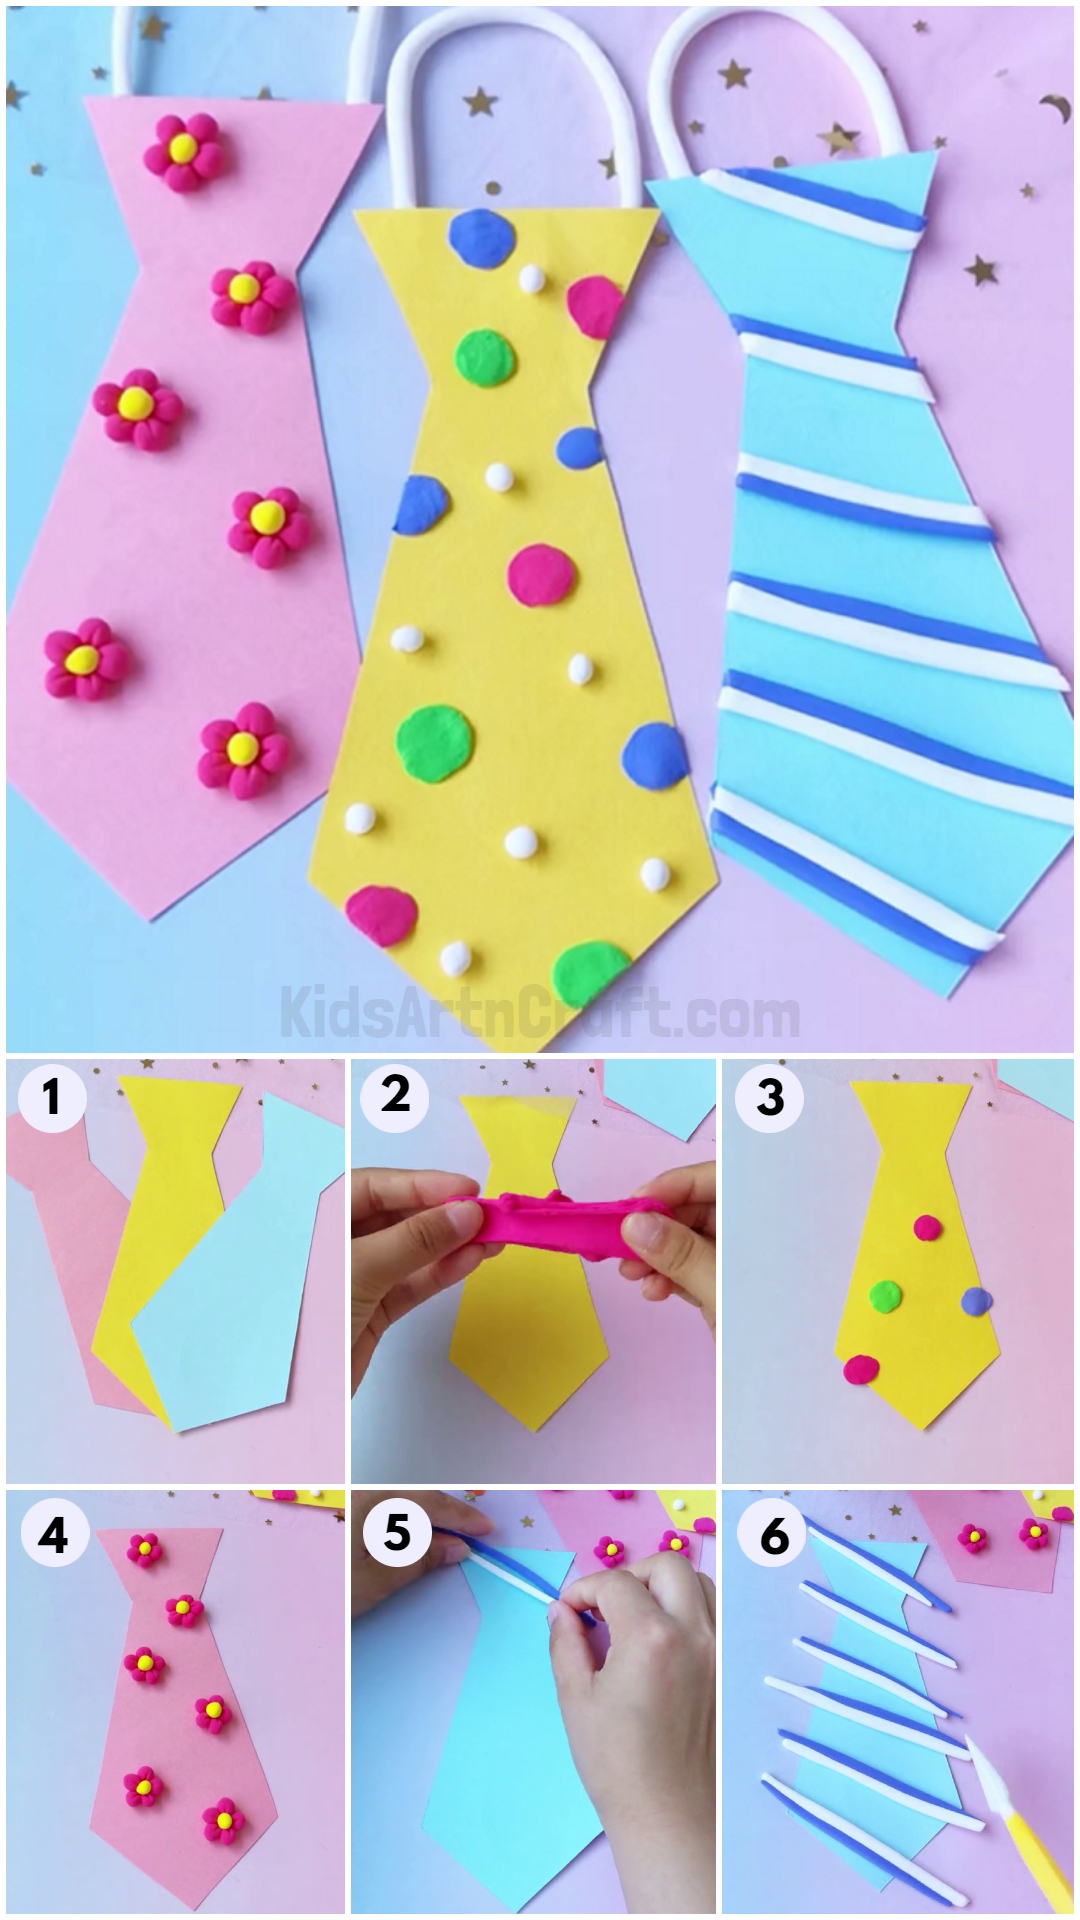 How To Make Paper Neck-tie easy tutorial for kids